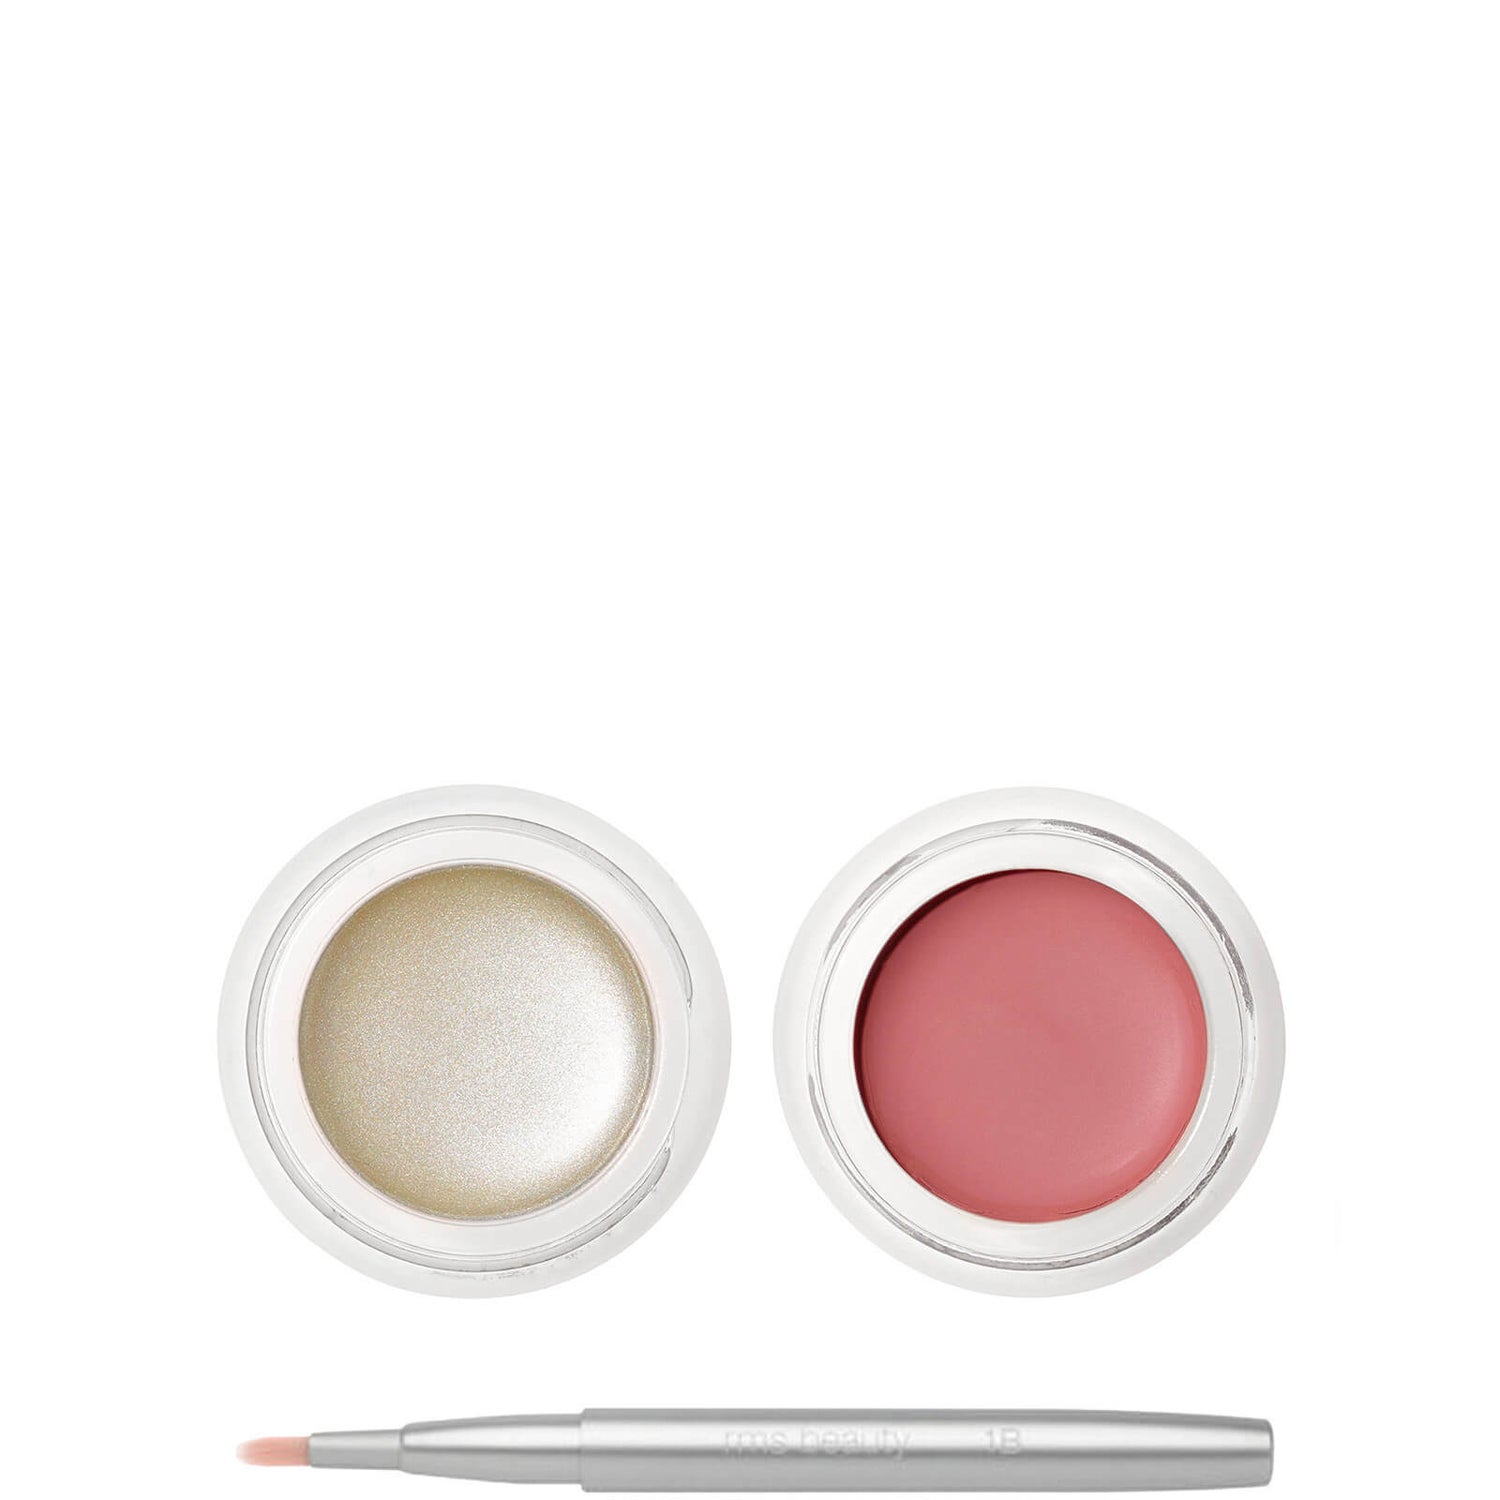 RMS Beauty Bright and Blushing Set (Worth £82.00)